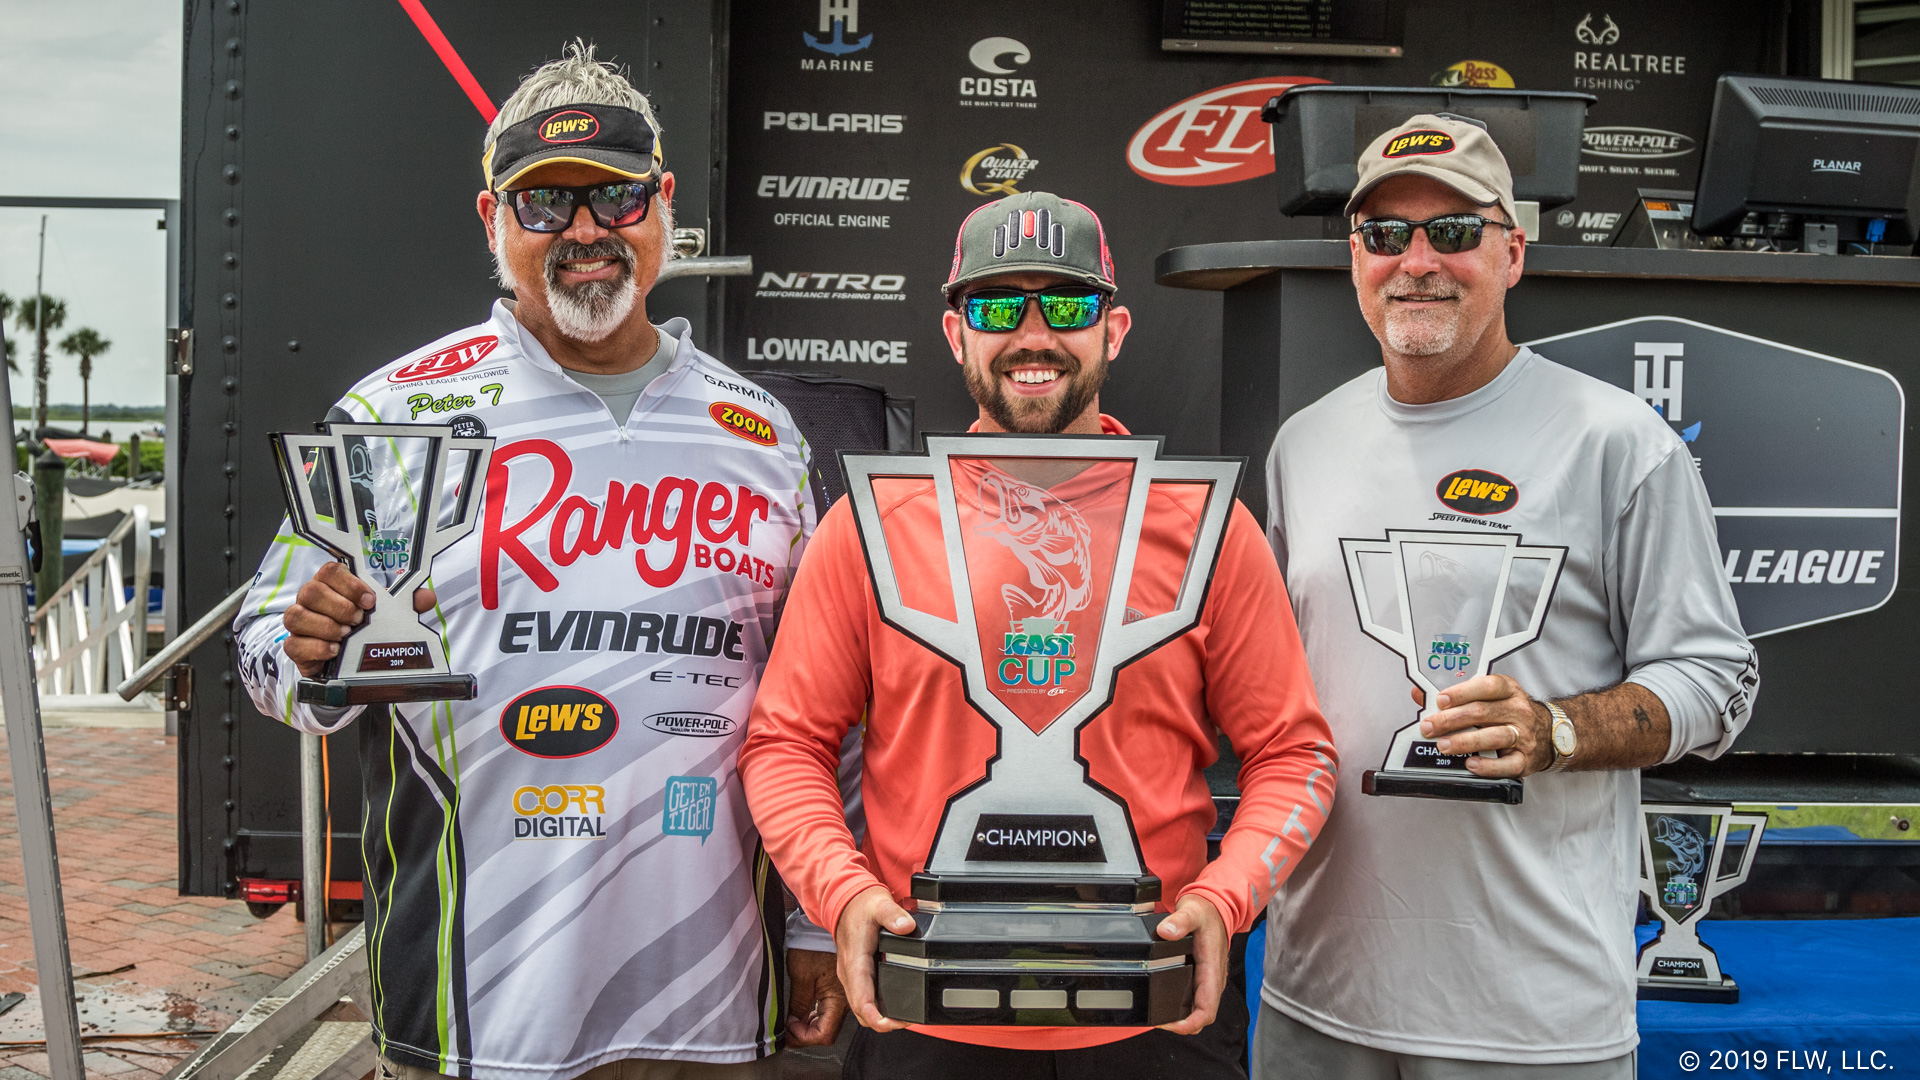 Peter T and Crew Win ICAST Cup - Major League Fishing